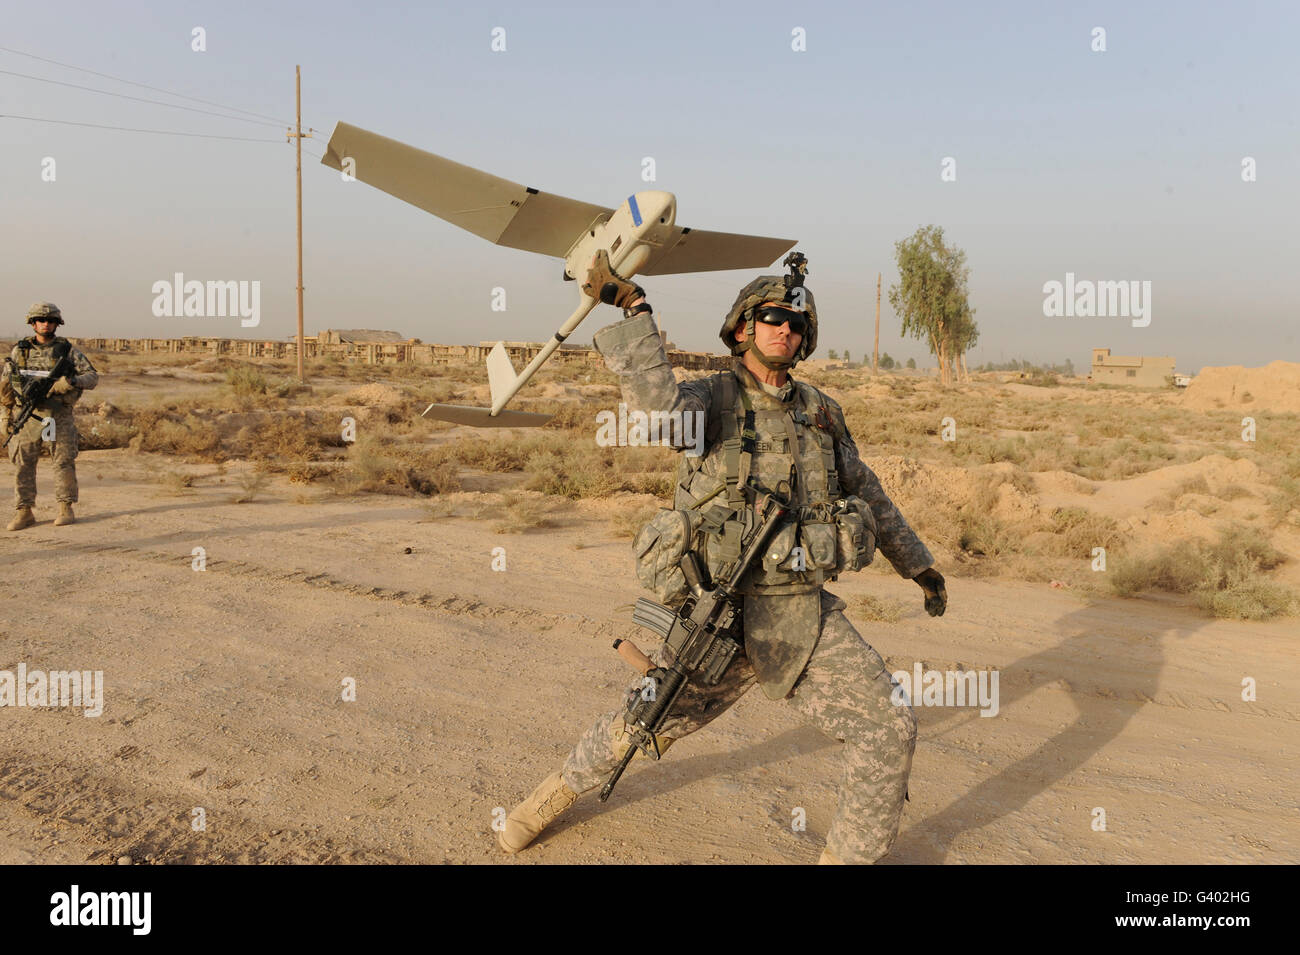 U.S. Army Specialist launches an RQ-11 Raven unmanned aerial vehicle. Stock Photo